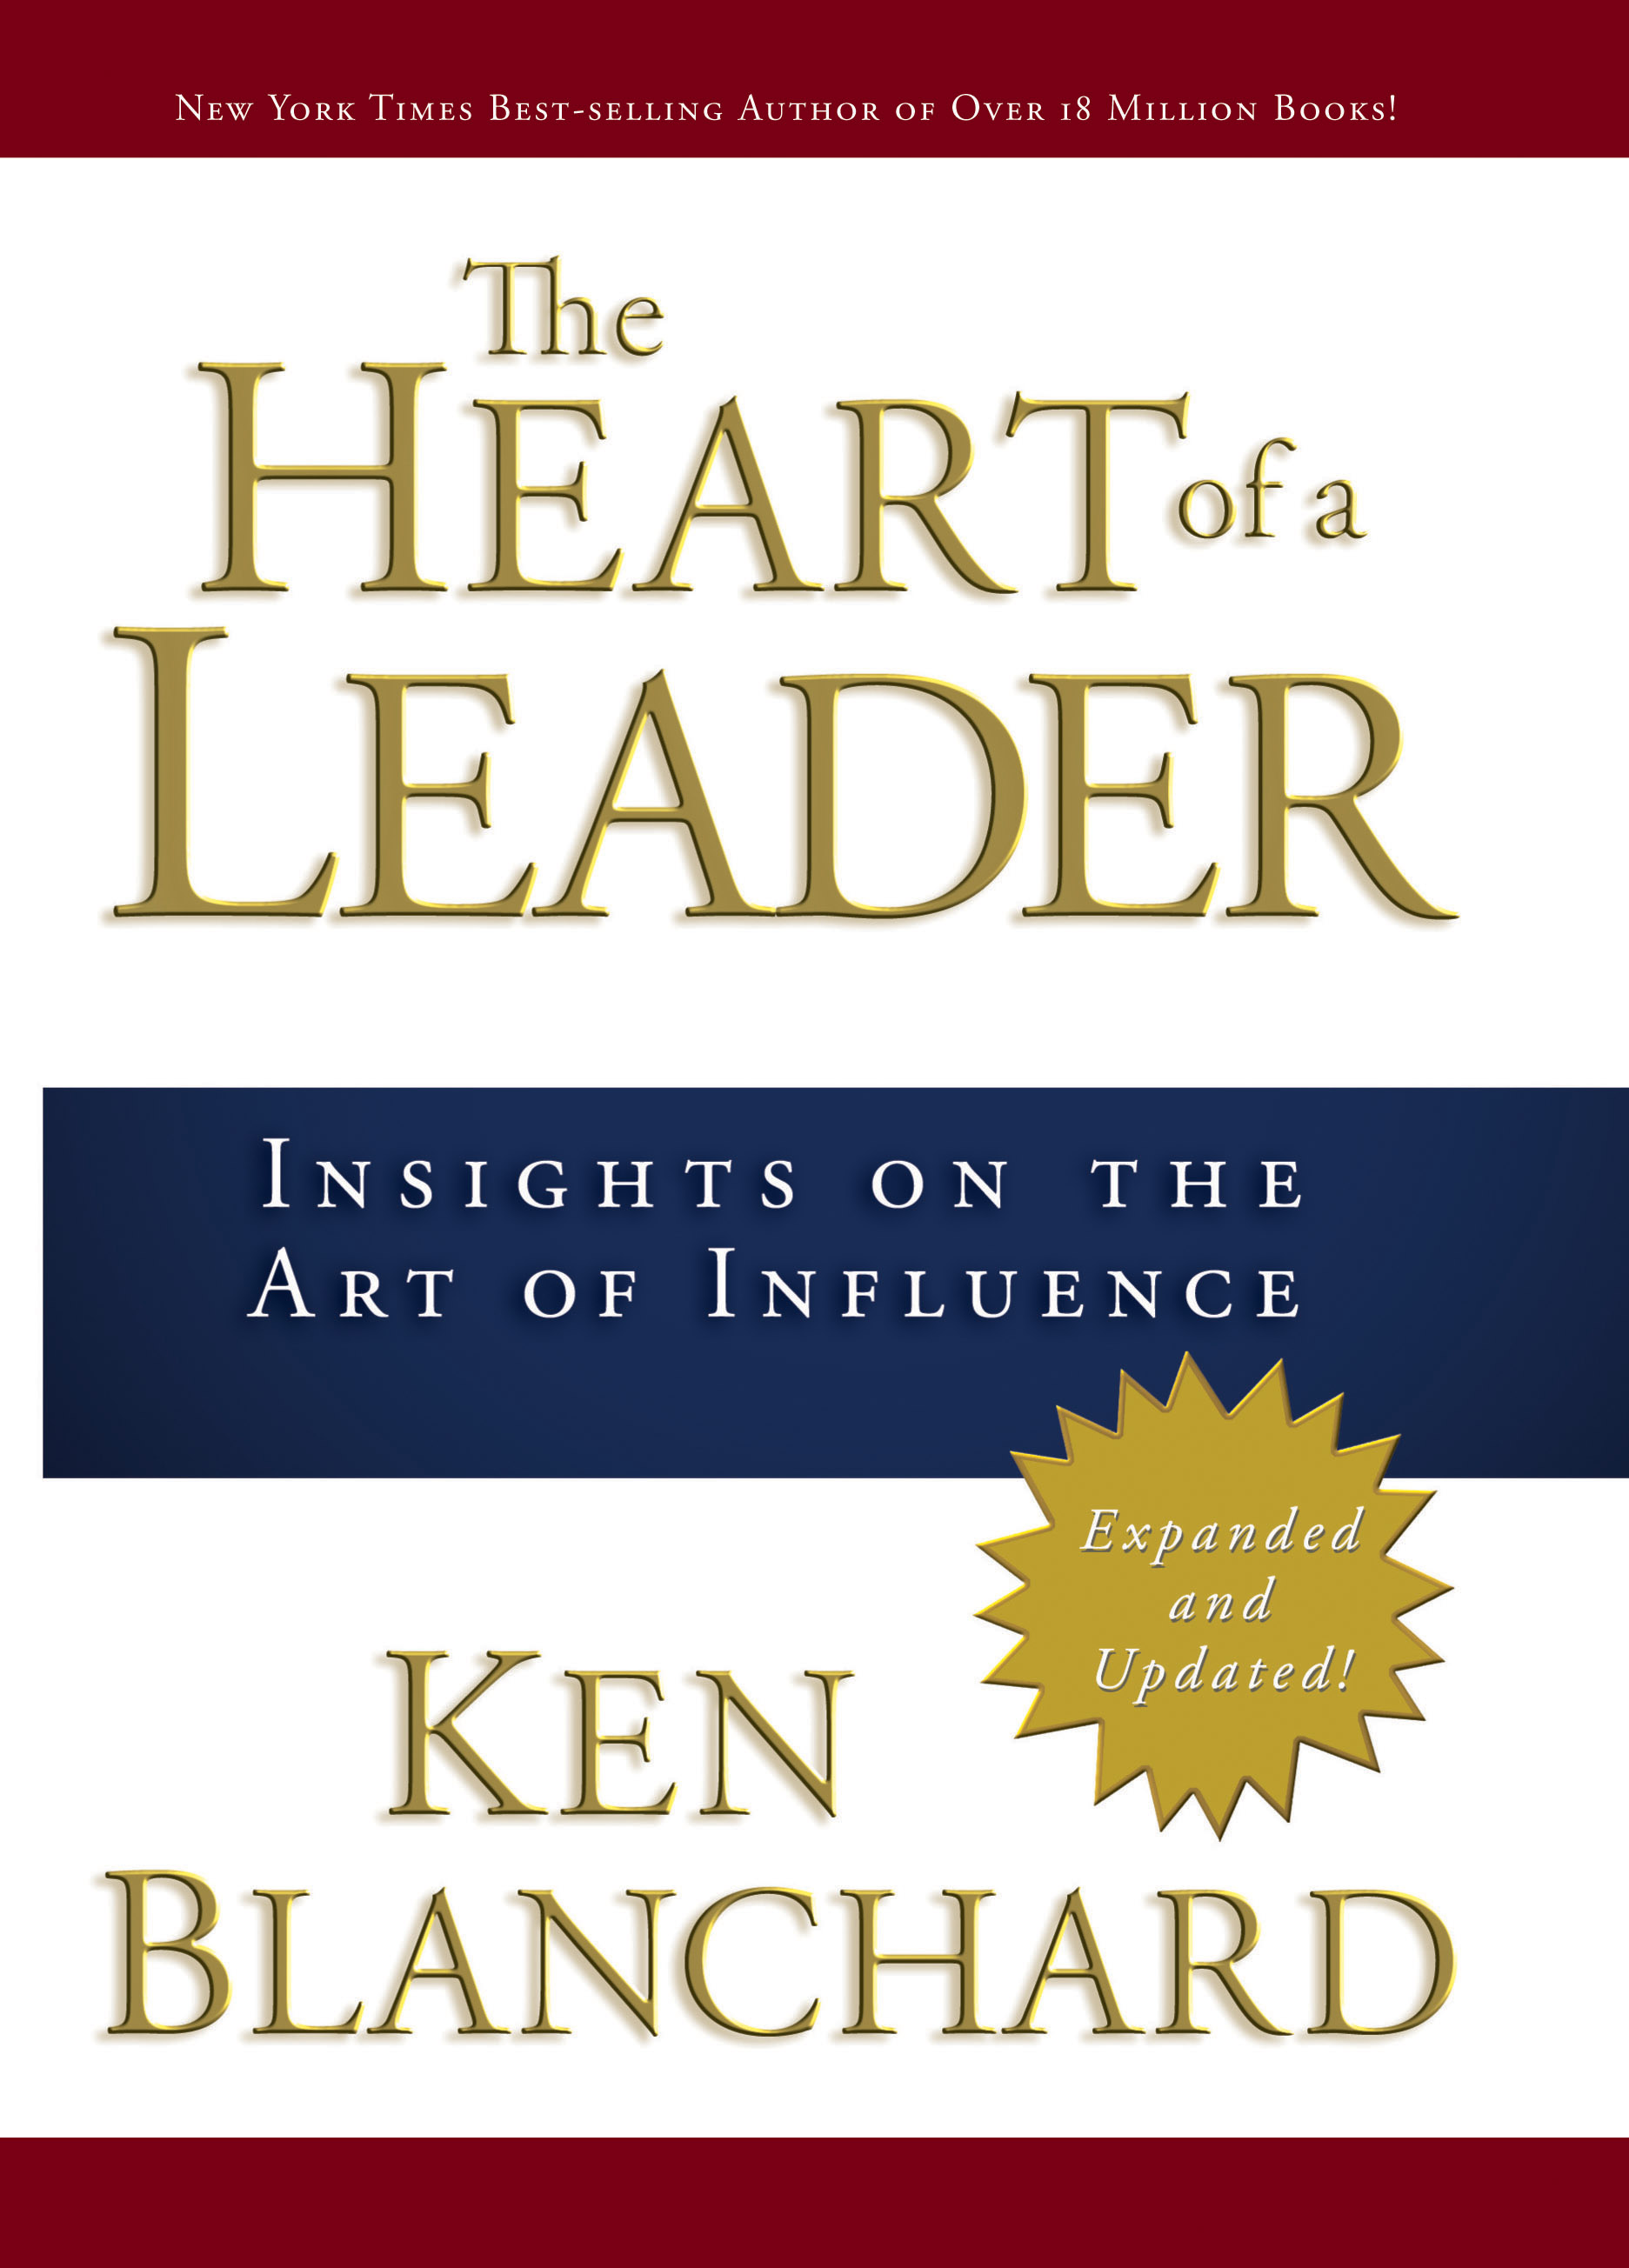 Heart of a Leader